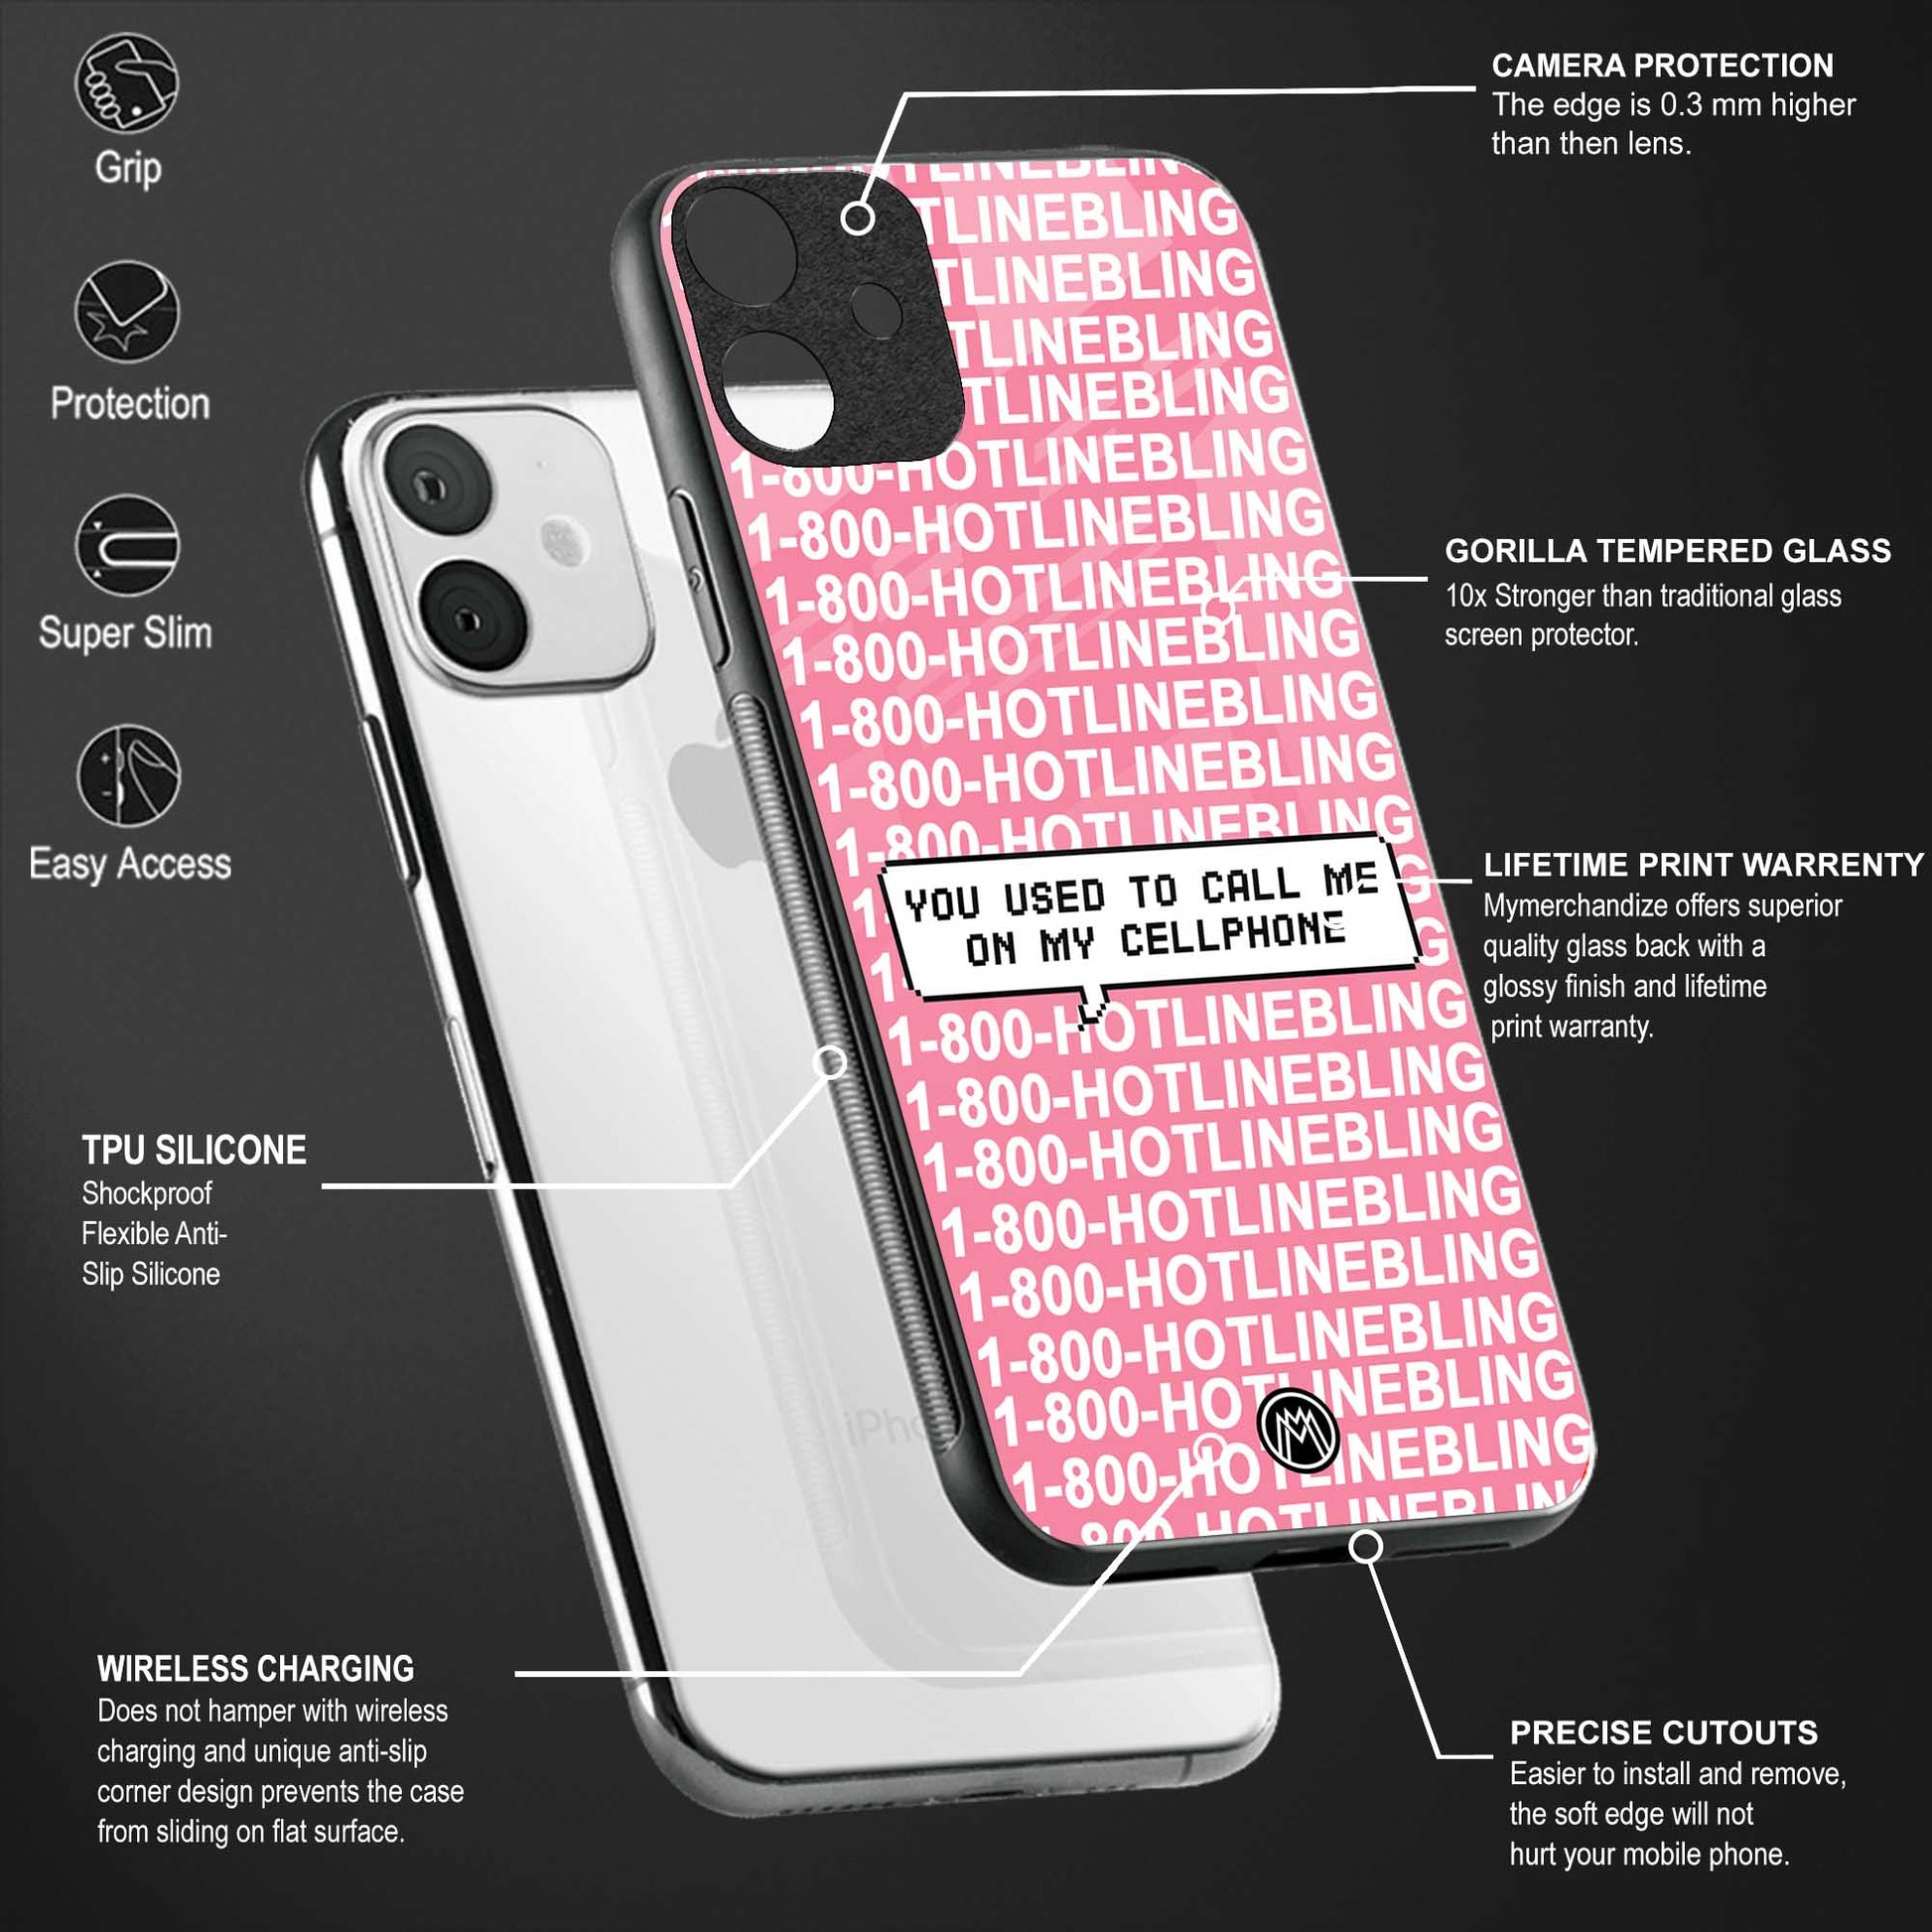 1800 hotline bling phone cover for samsung galaxy s20 plus 